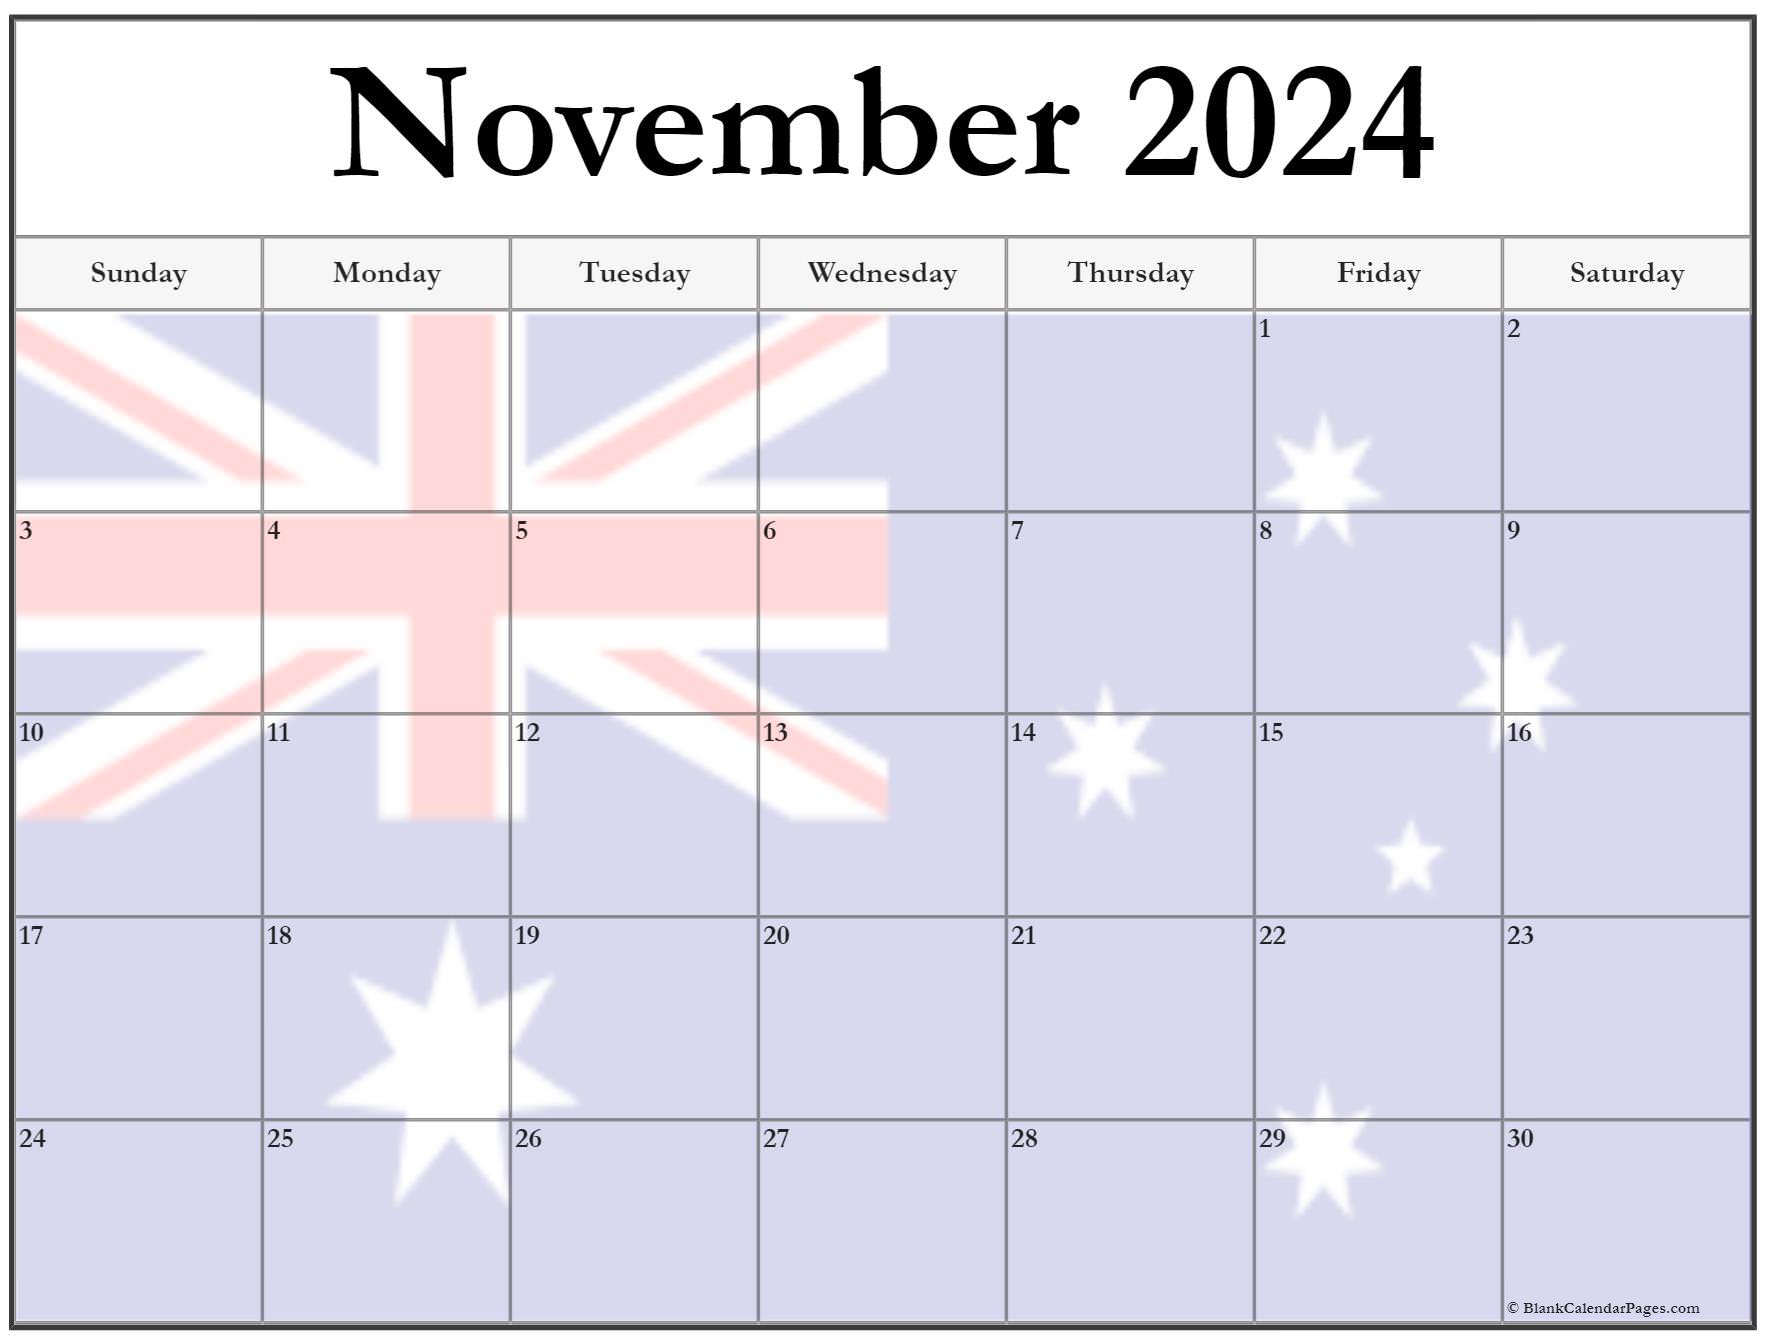 Collection of November 2022 photo calendars with image ...